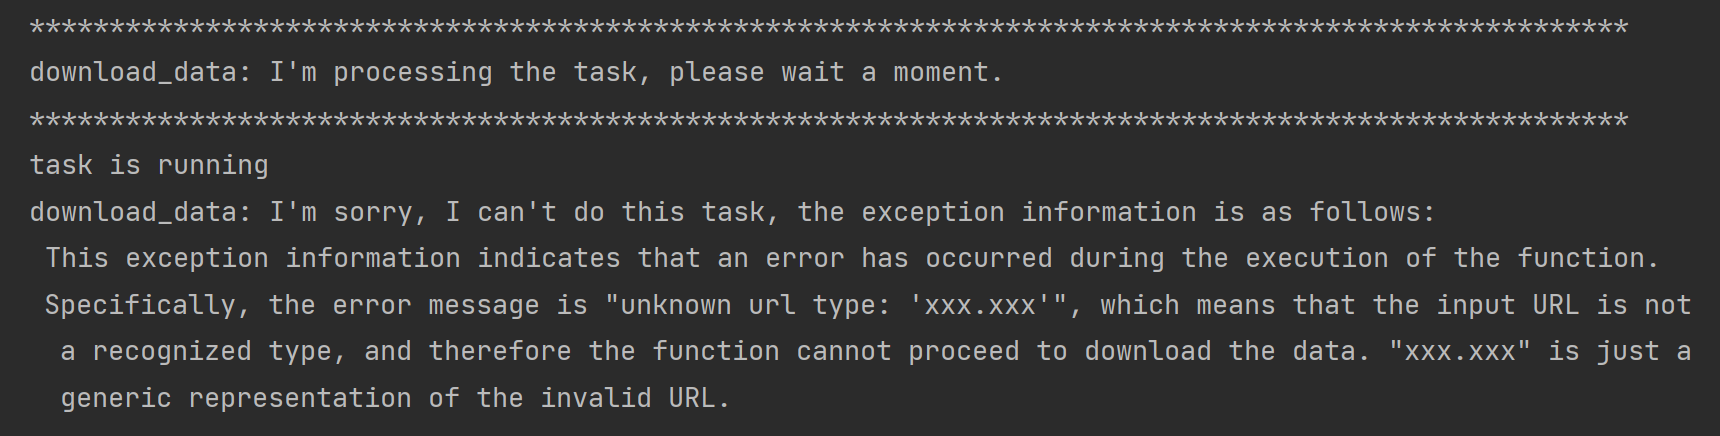 task_exception_image